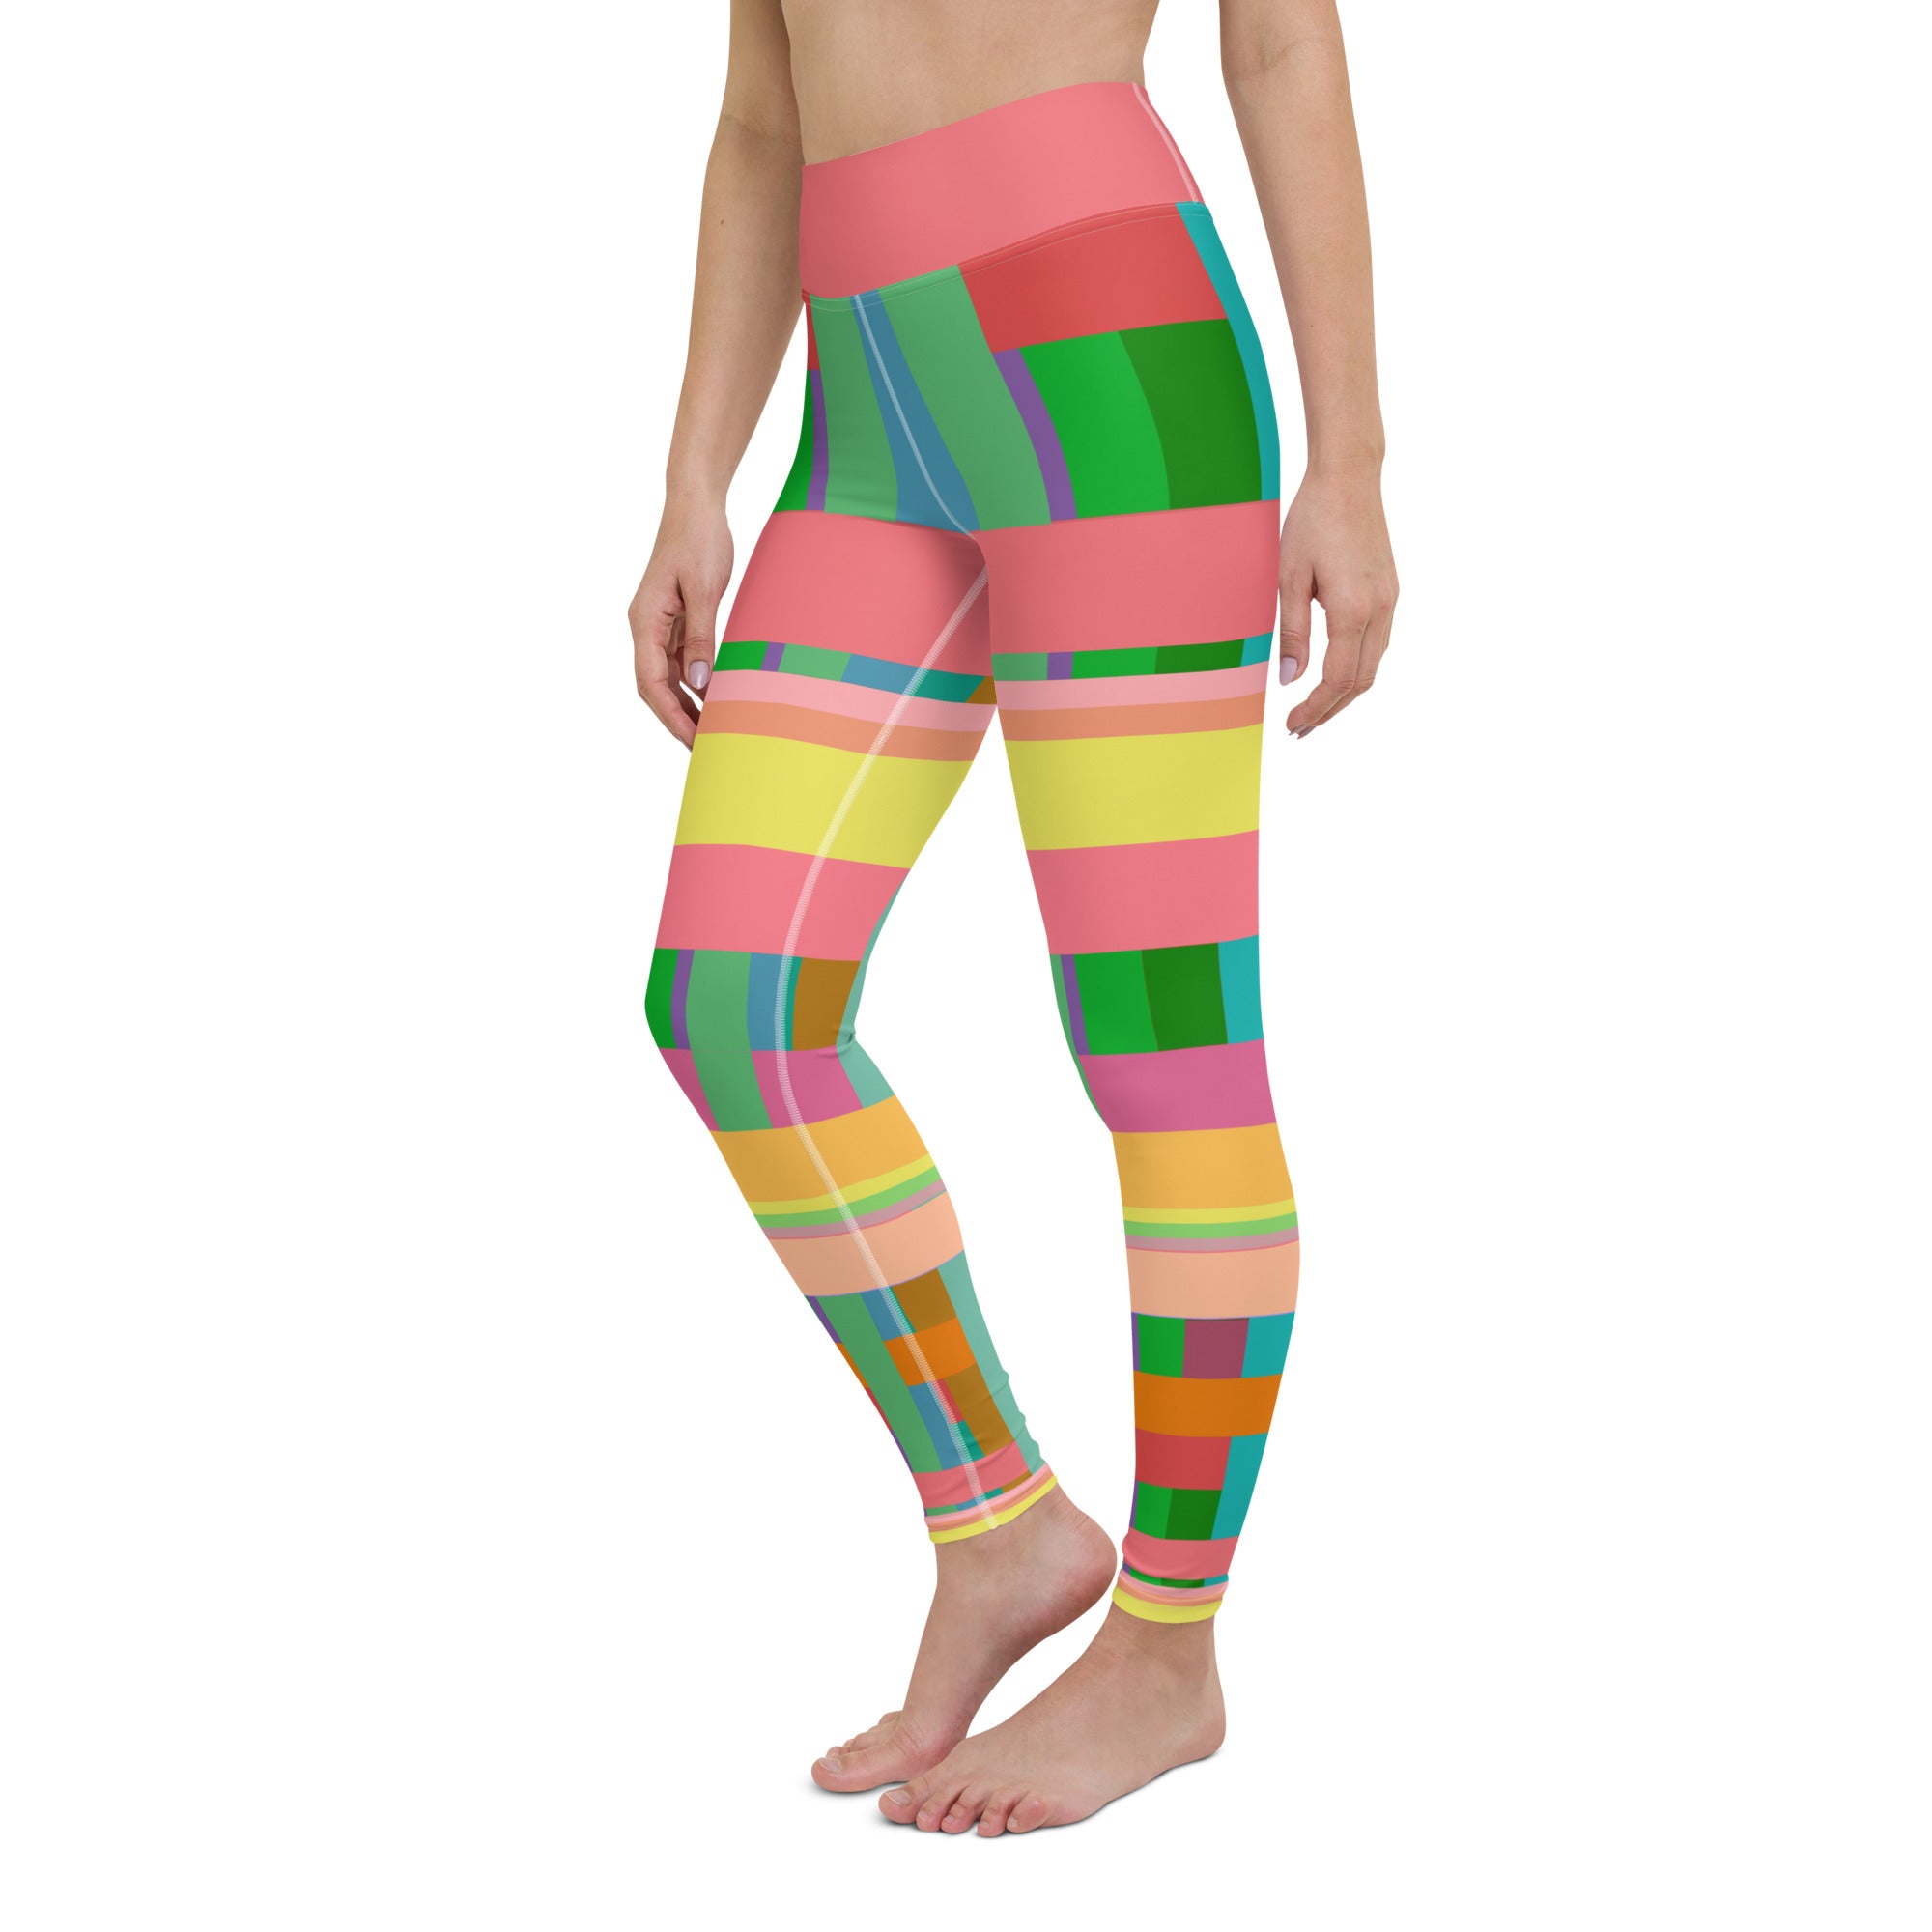 Sunset Serenade Yoga Leggings with a warm, calming sunset palette for a peaceful yoga session.